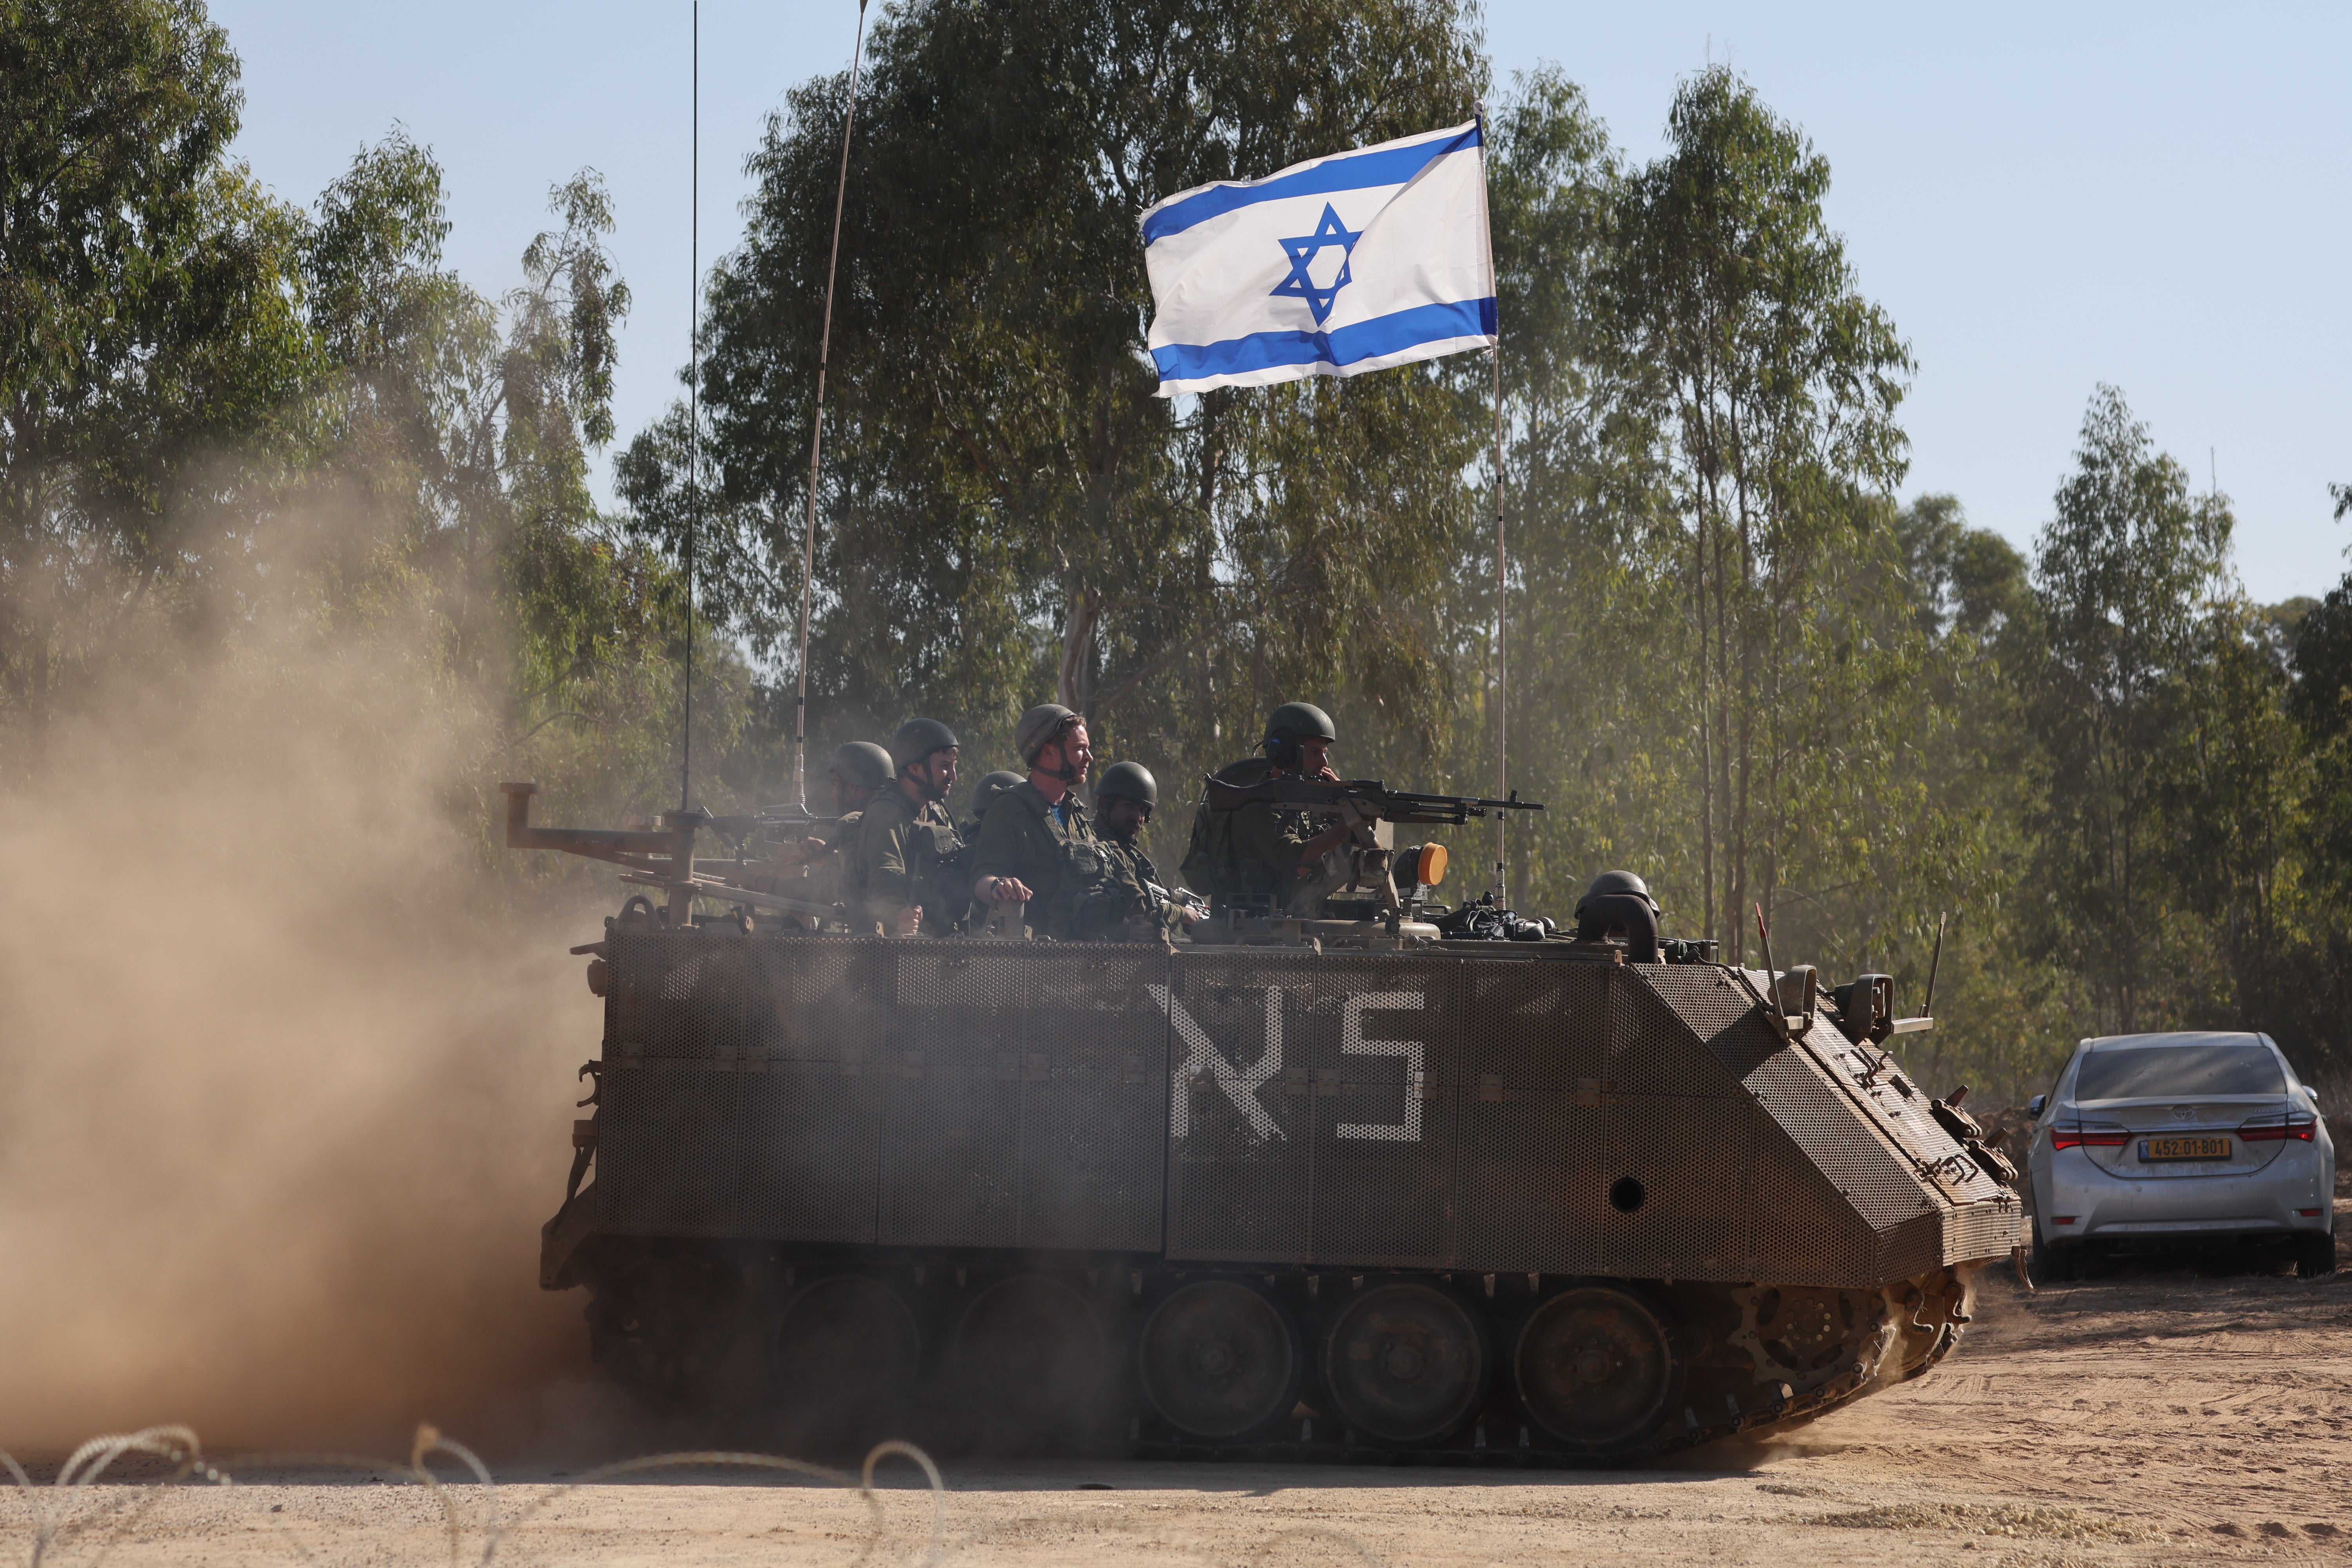 Israel’s mechanised units will be vulnerable to Hamas’ drones